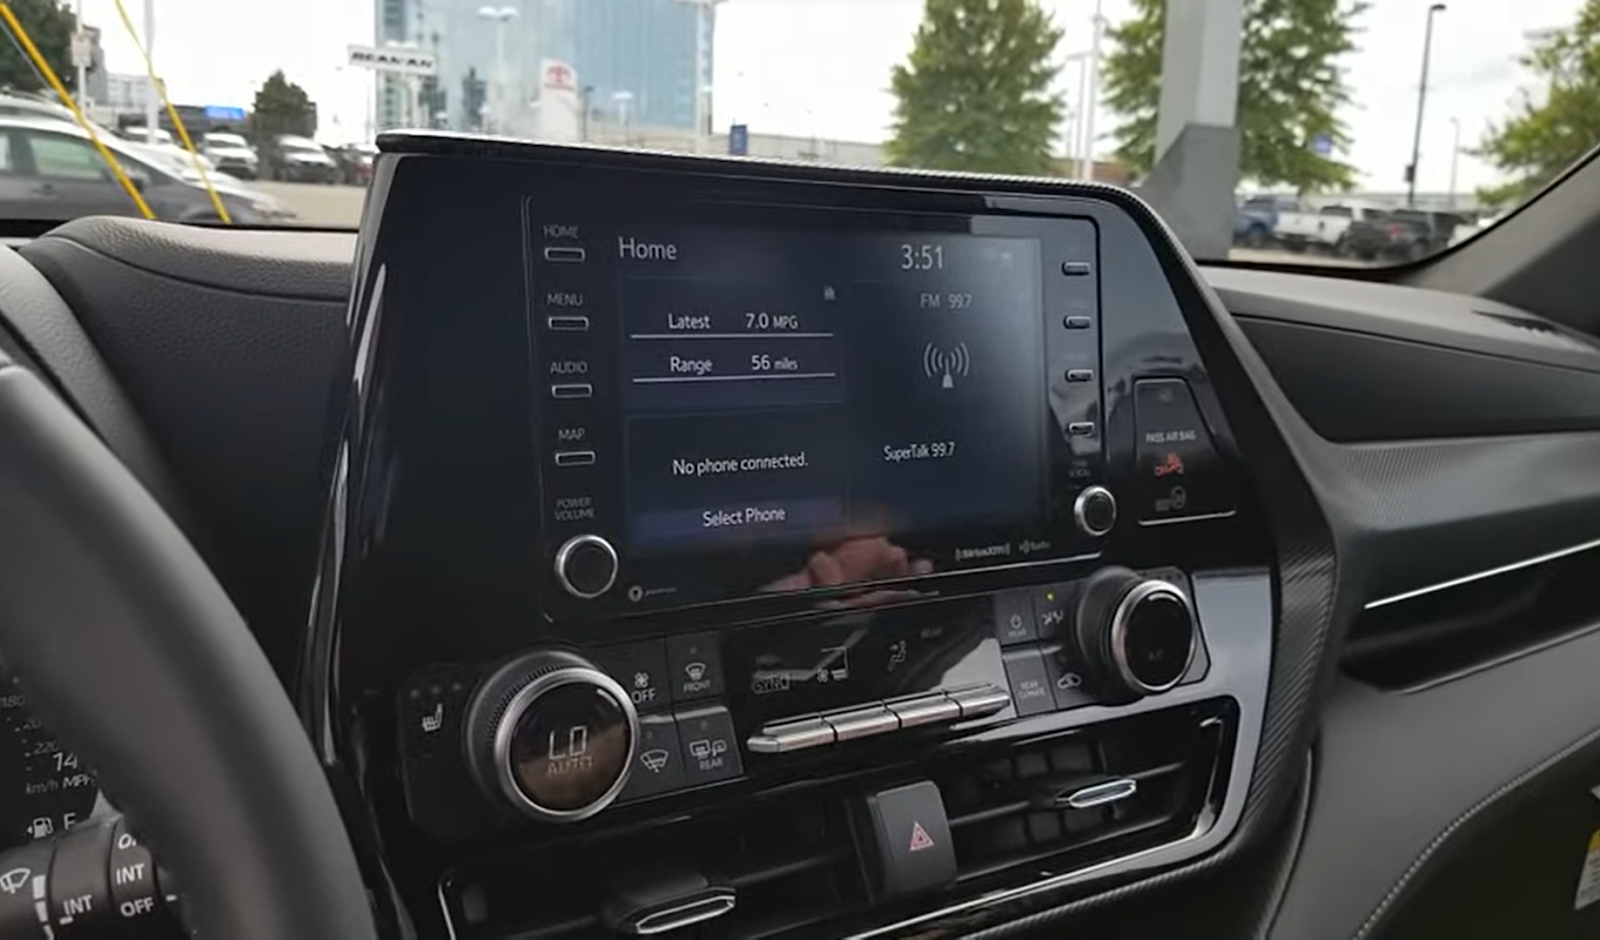 Toyota’s Automatic Sound Levelizer: A Functionality Overview